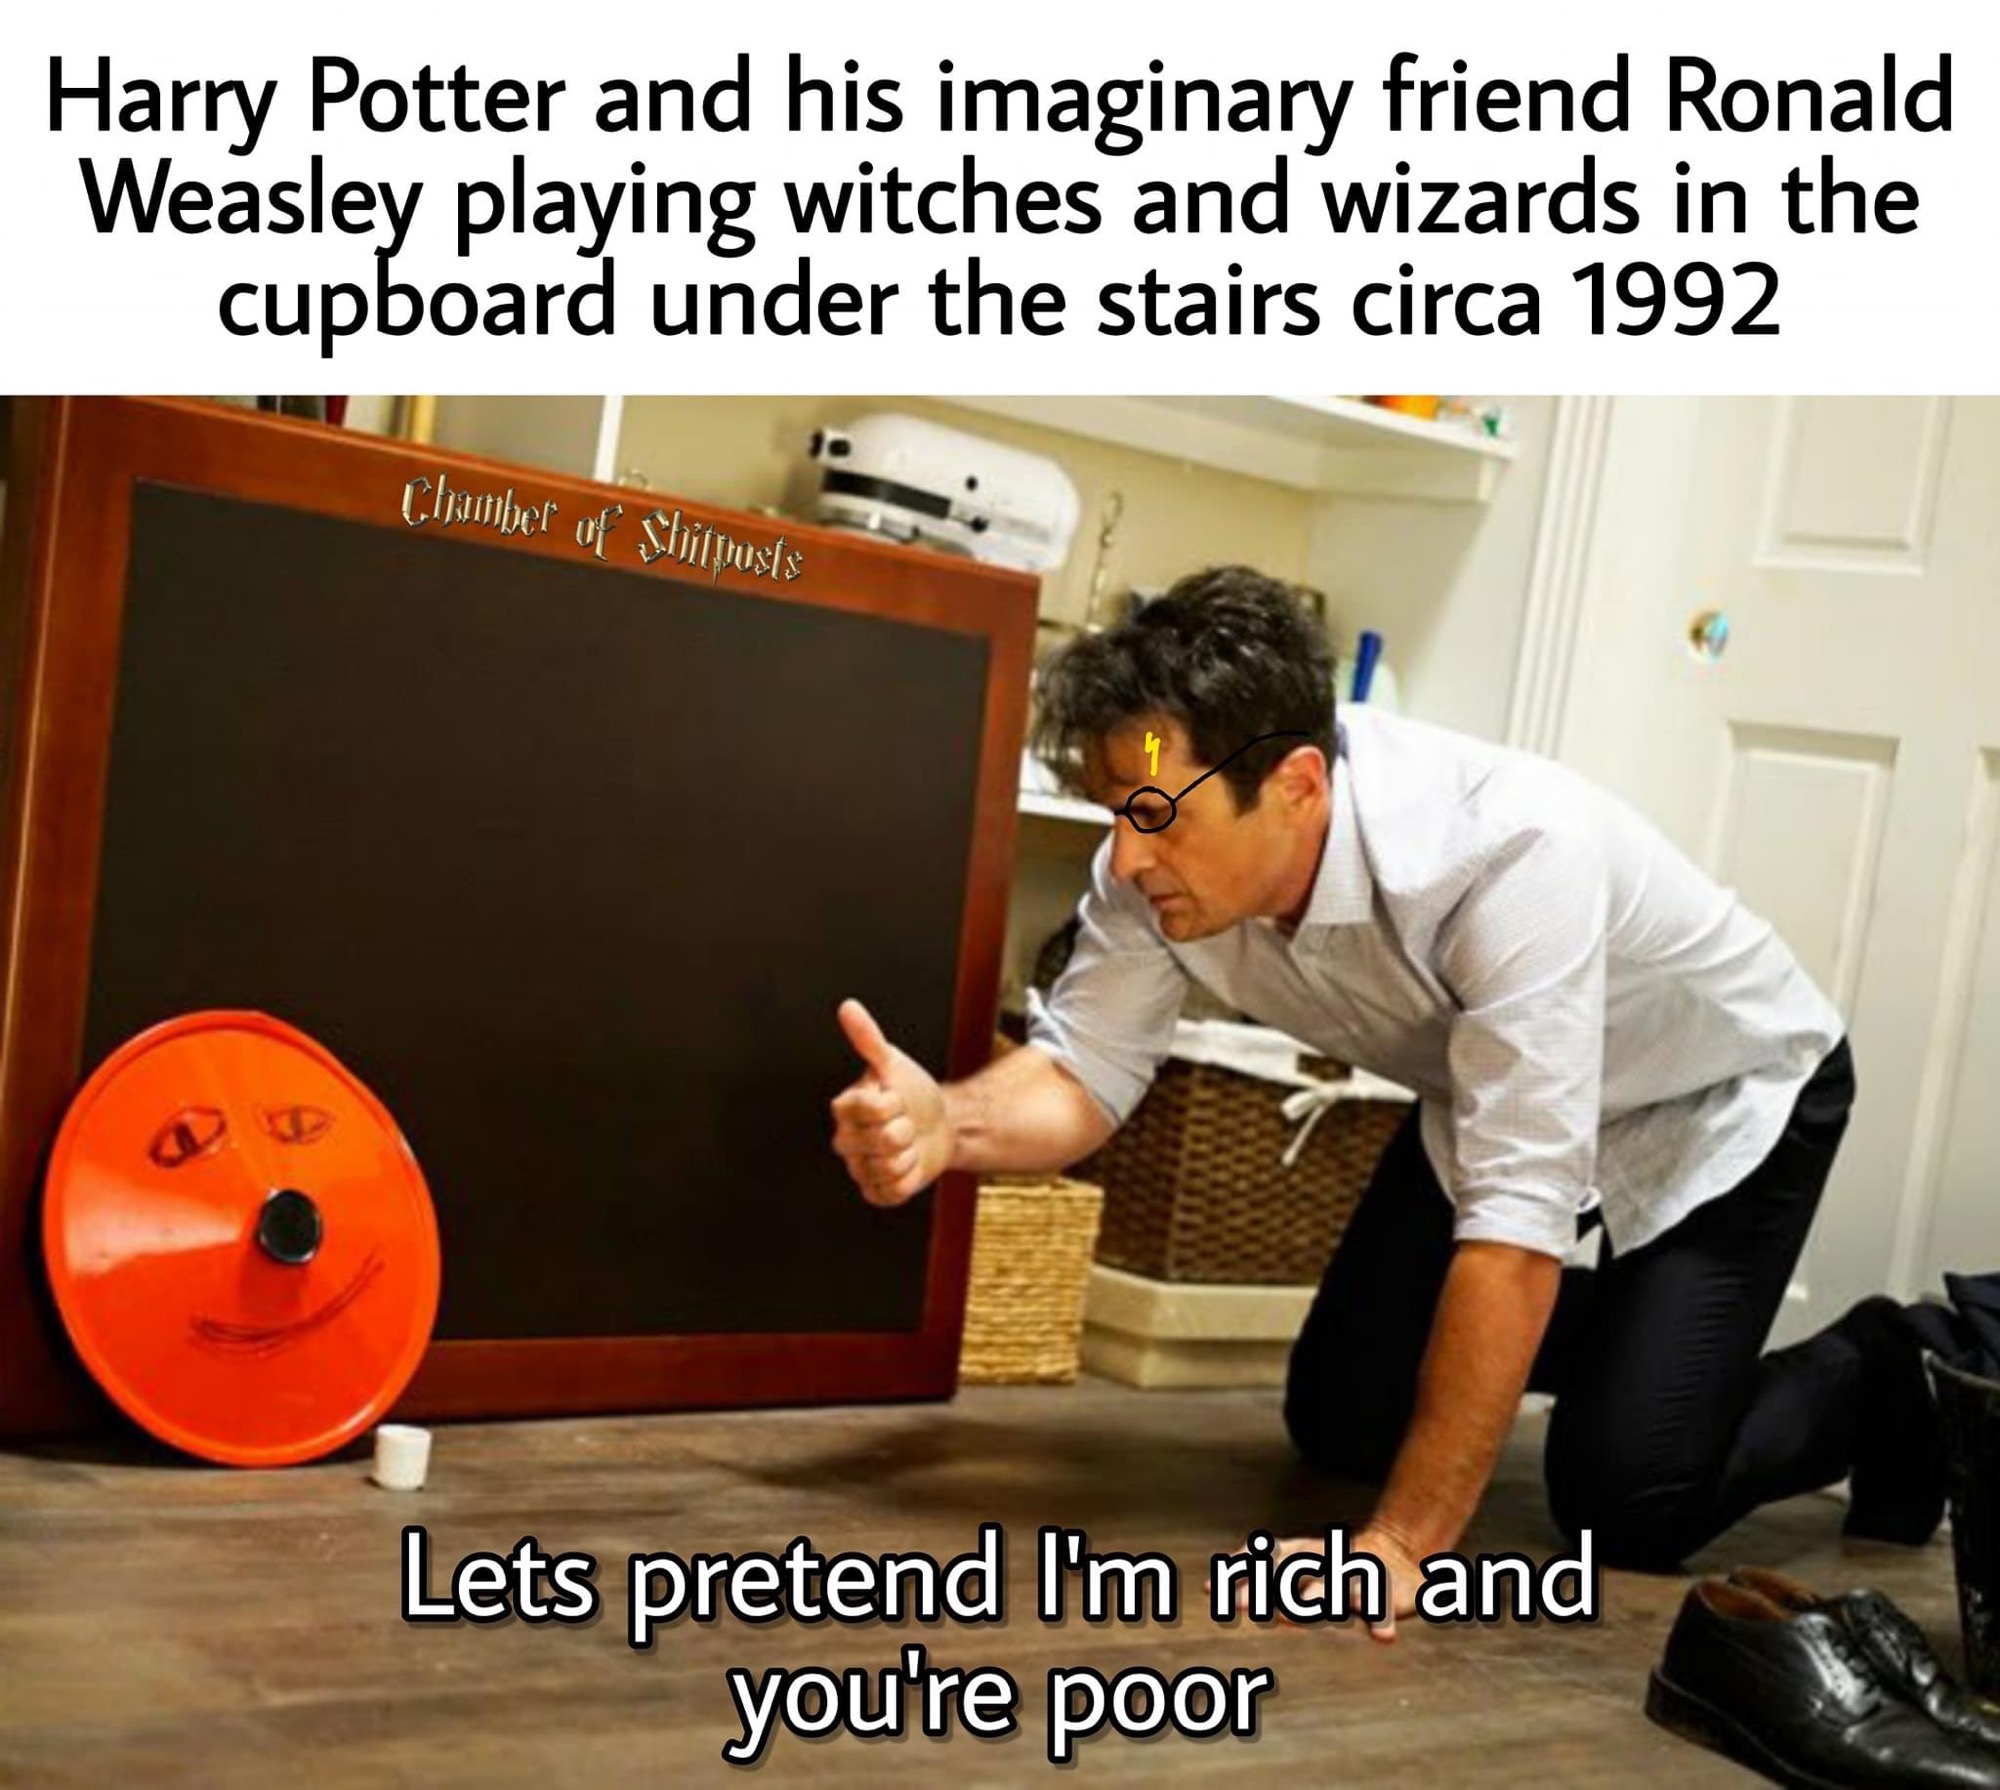 table - Harry Potter and his imaginary friend Ronald Weasley playing witches and wizards in the cupboard under the stairs circa 1992 Lets pretend I'm rich and you're poor